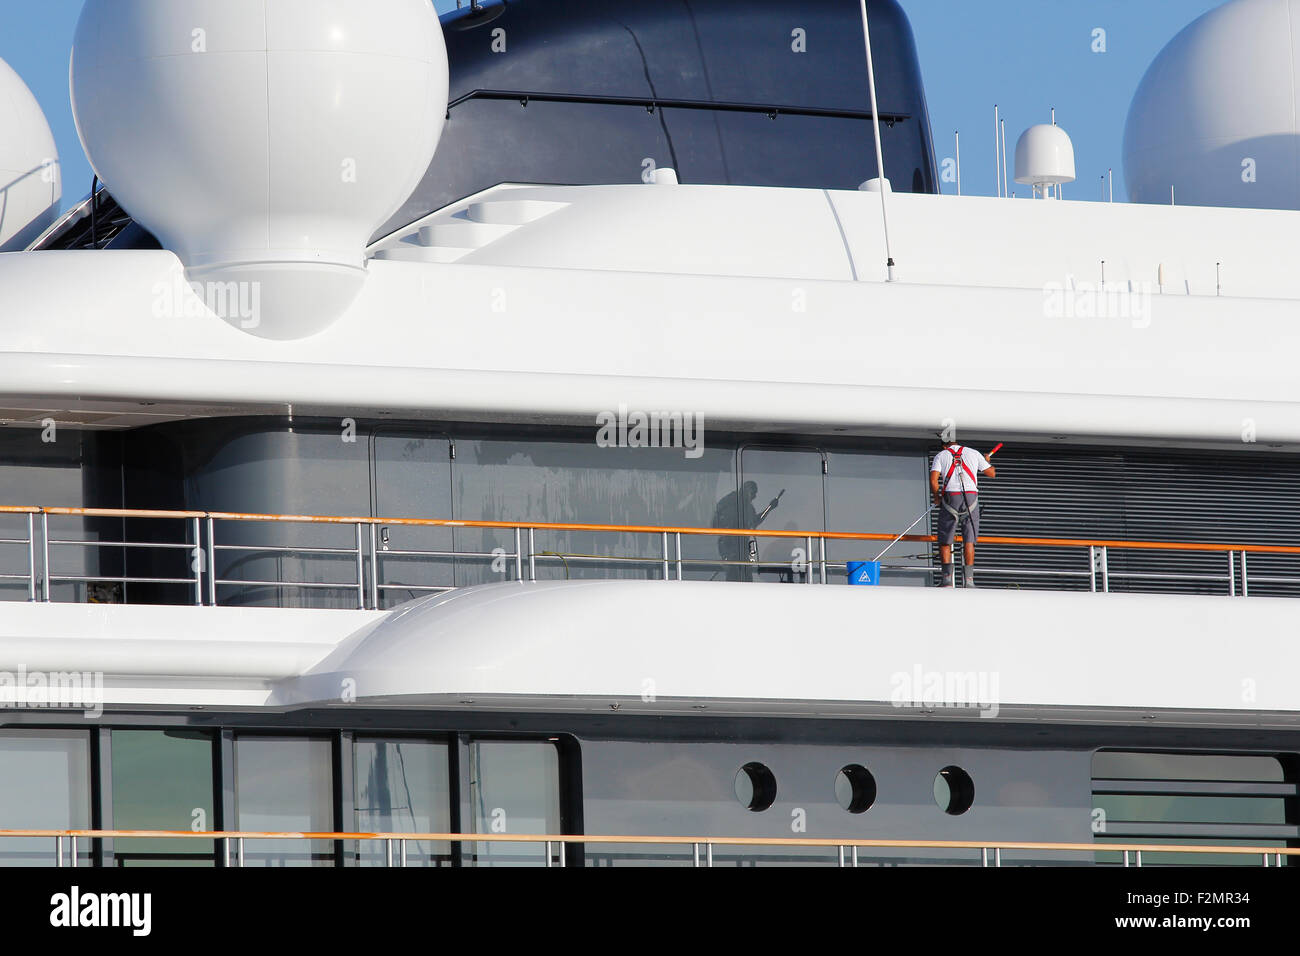 Luxury yacht being cleaned by unidentified crew member Stock Photo